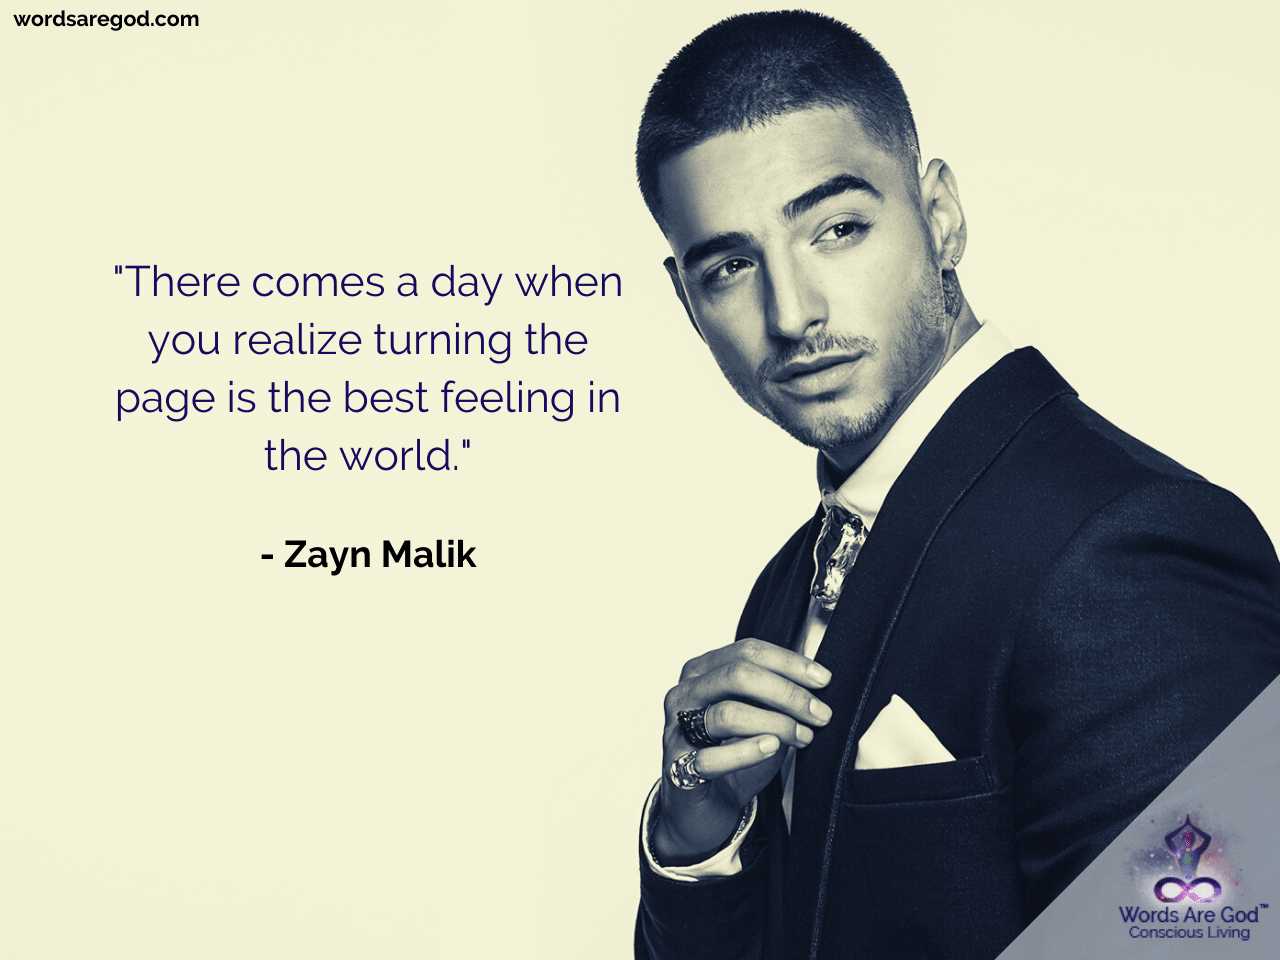 Zayn Malik Quotes. Life Quotes In English. Life Quotes Motivational. Music Quotes Wallpaper